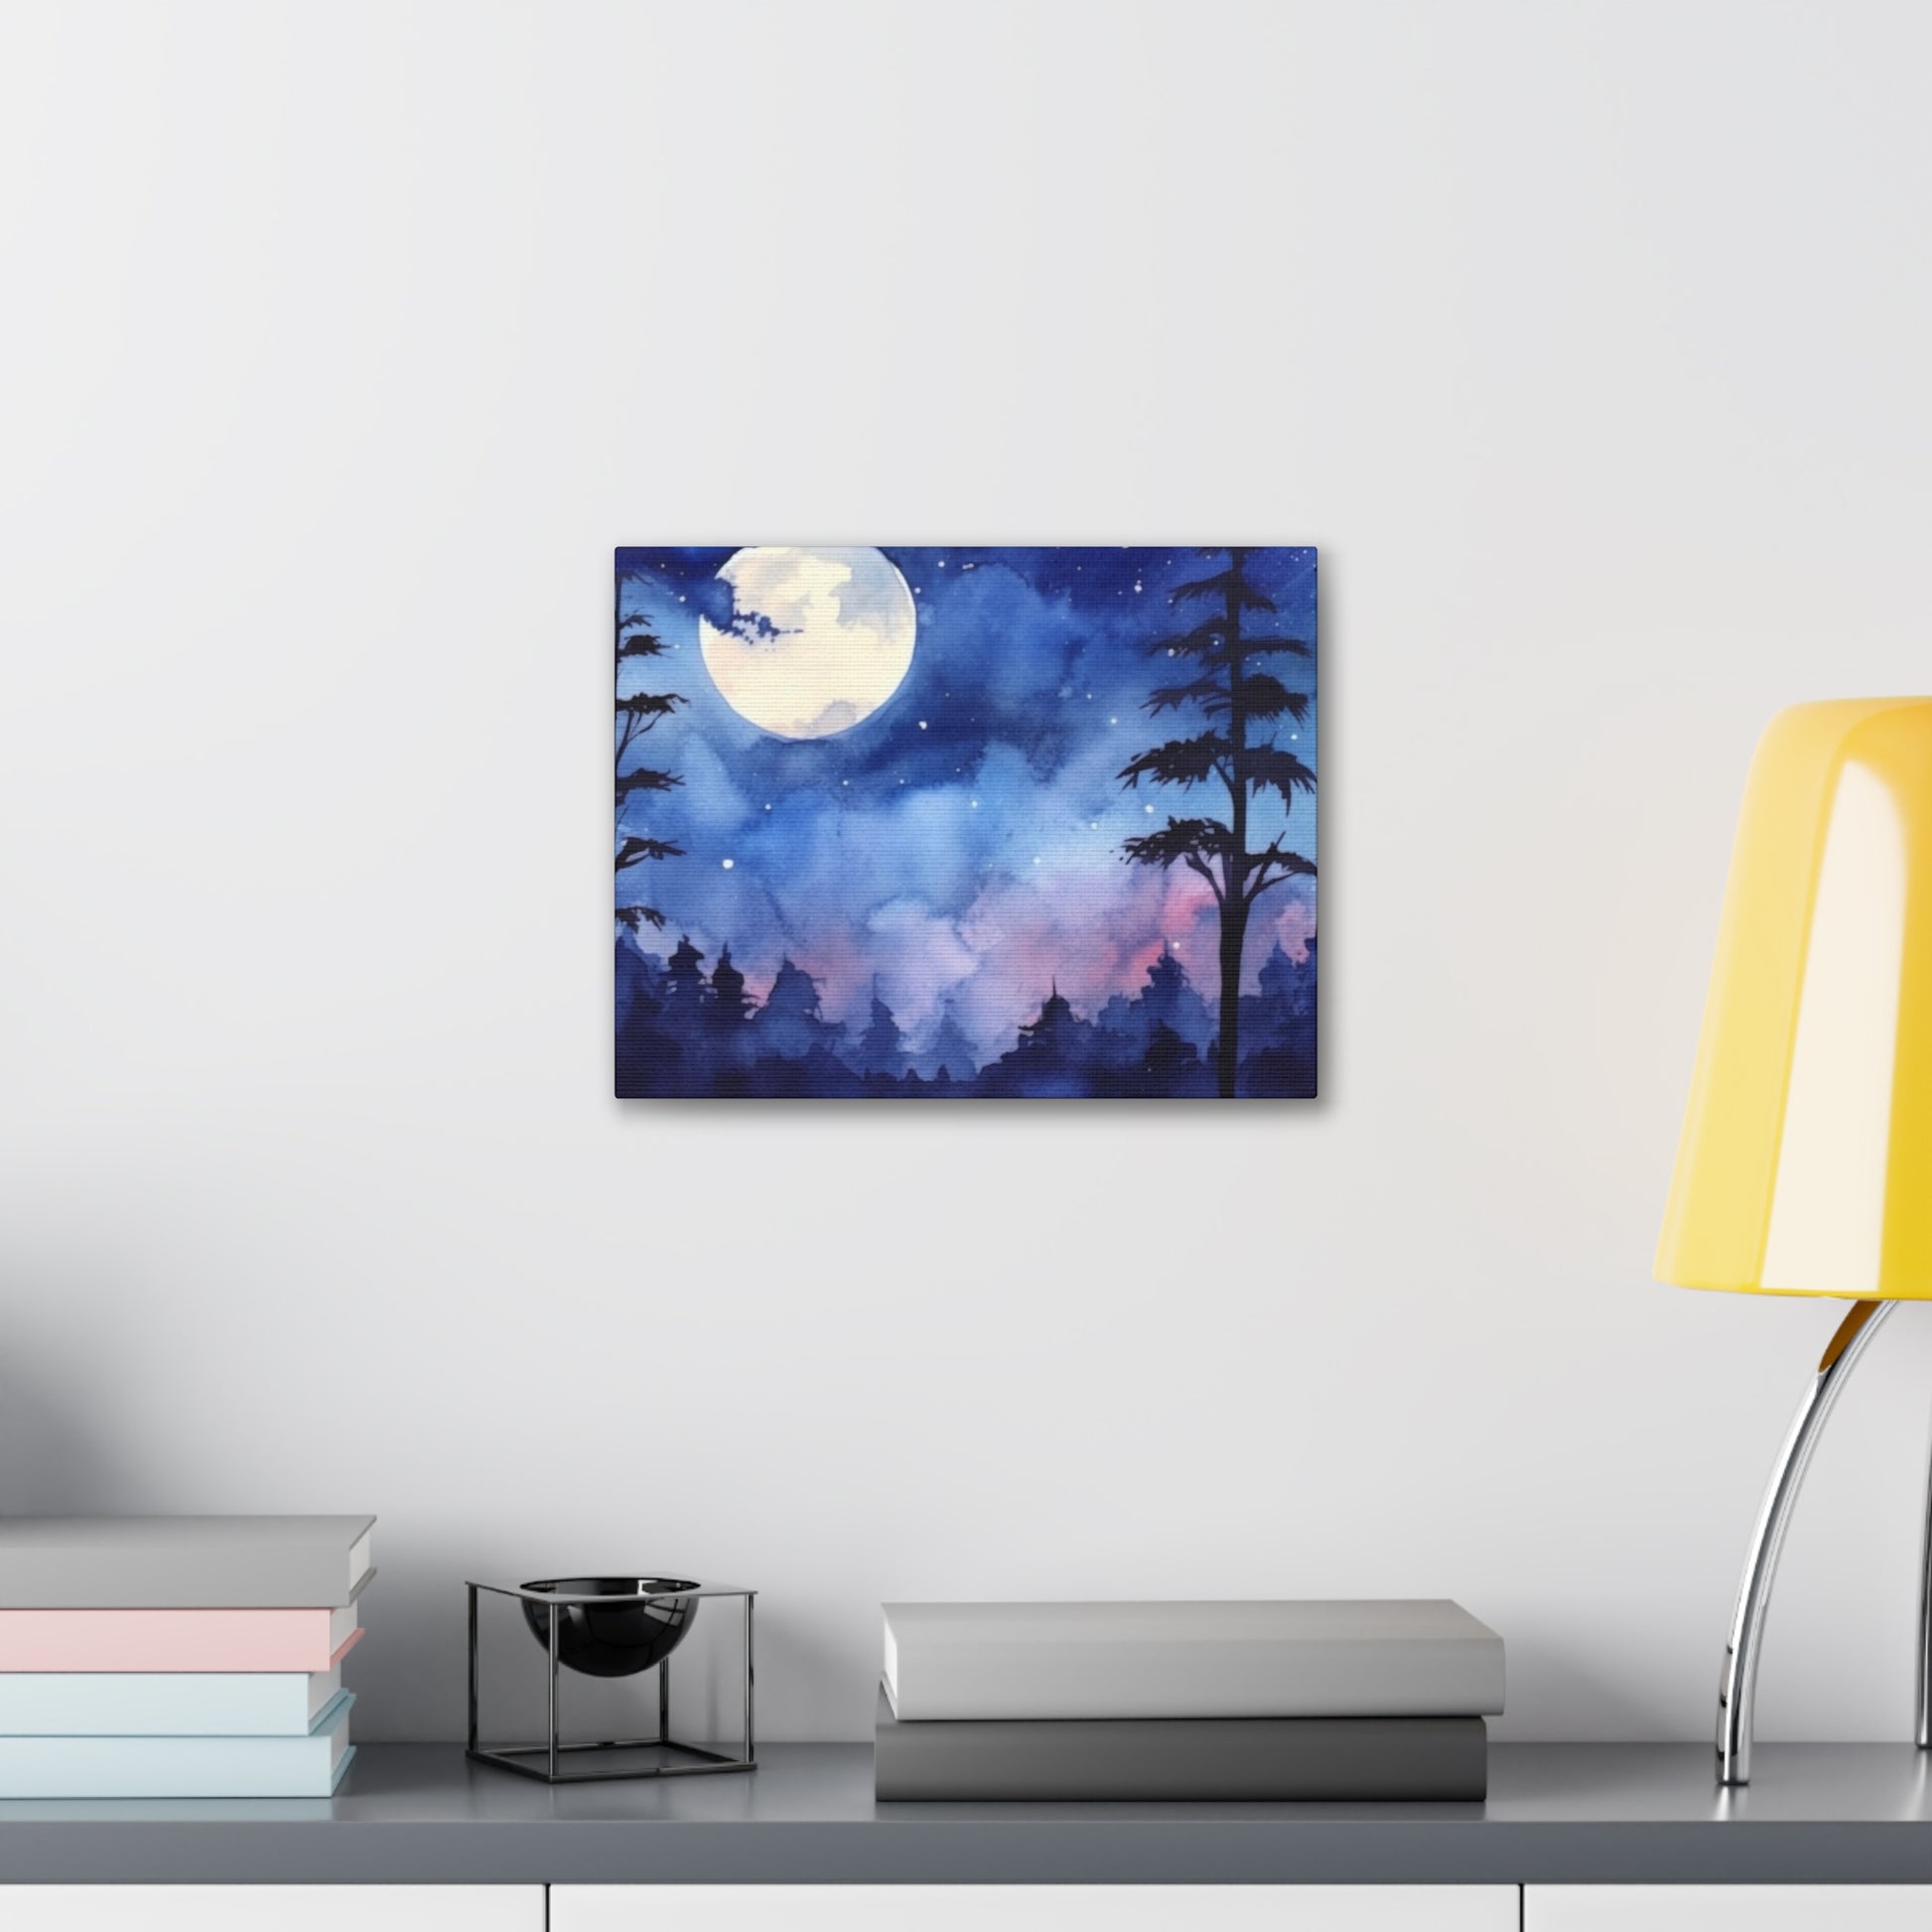 Night Sky Canvas Gallery Wrap, Full Moon Watercolor Wall Art Print Decor Small Large Hanging Modern Landscape Living Room Starcove Fashion